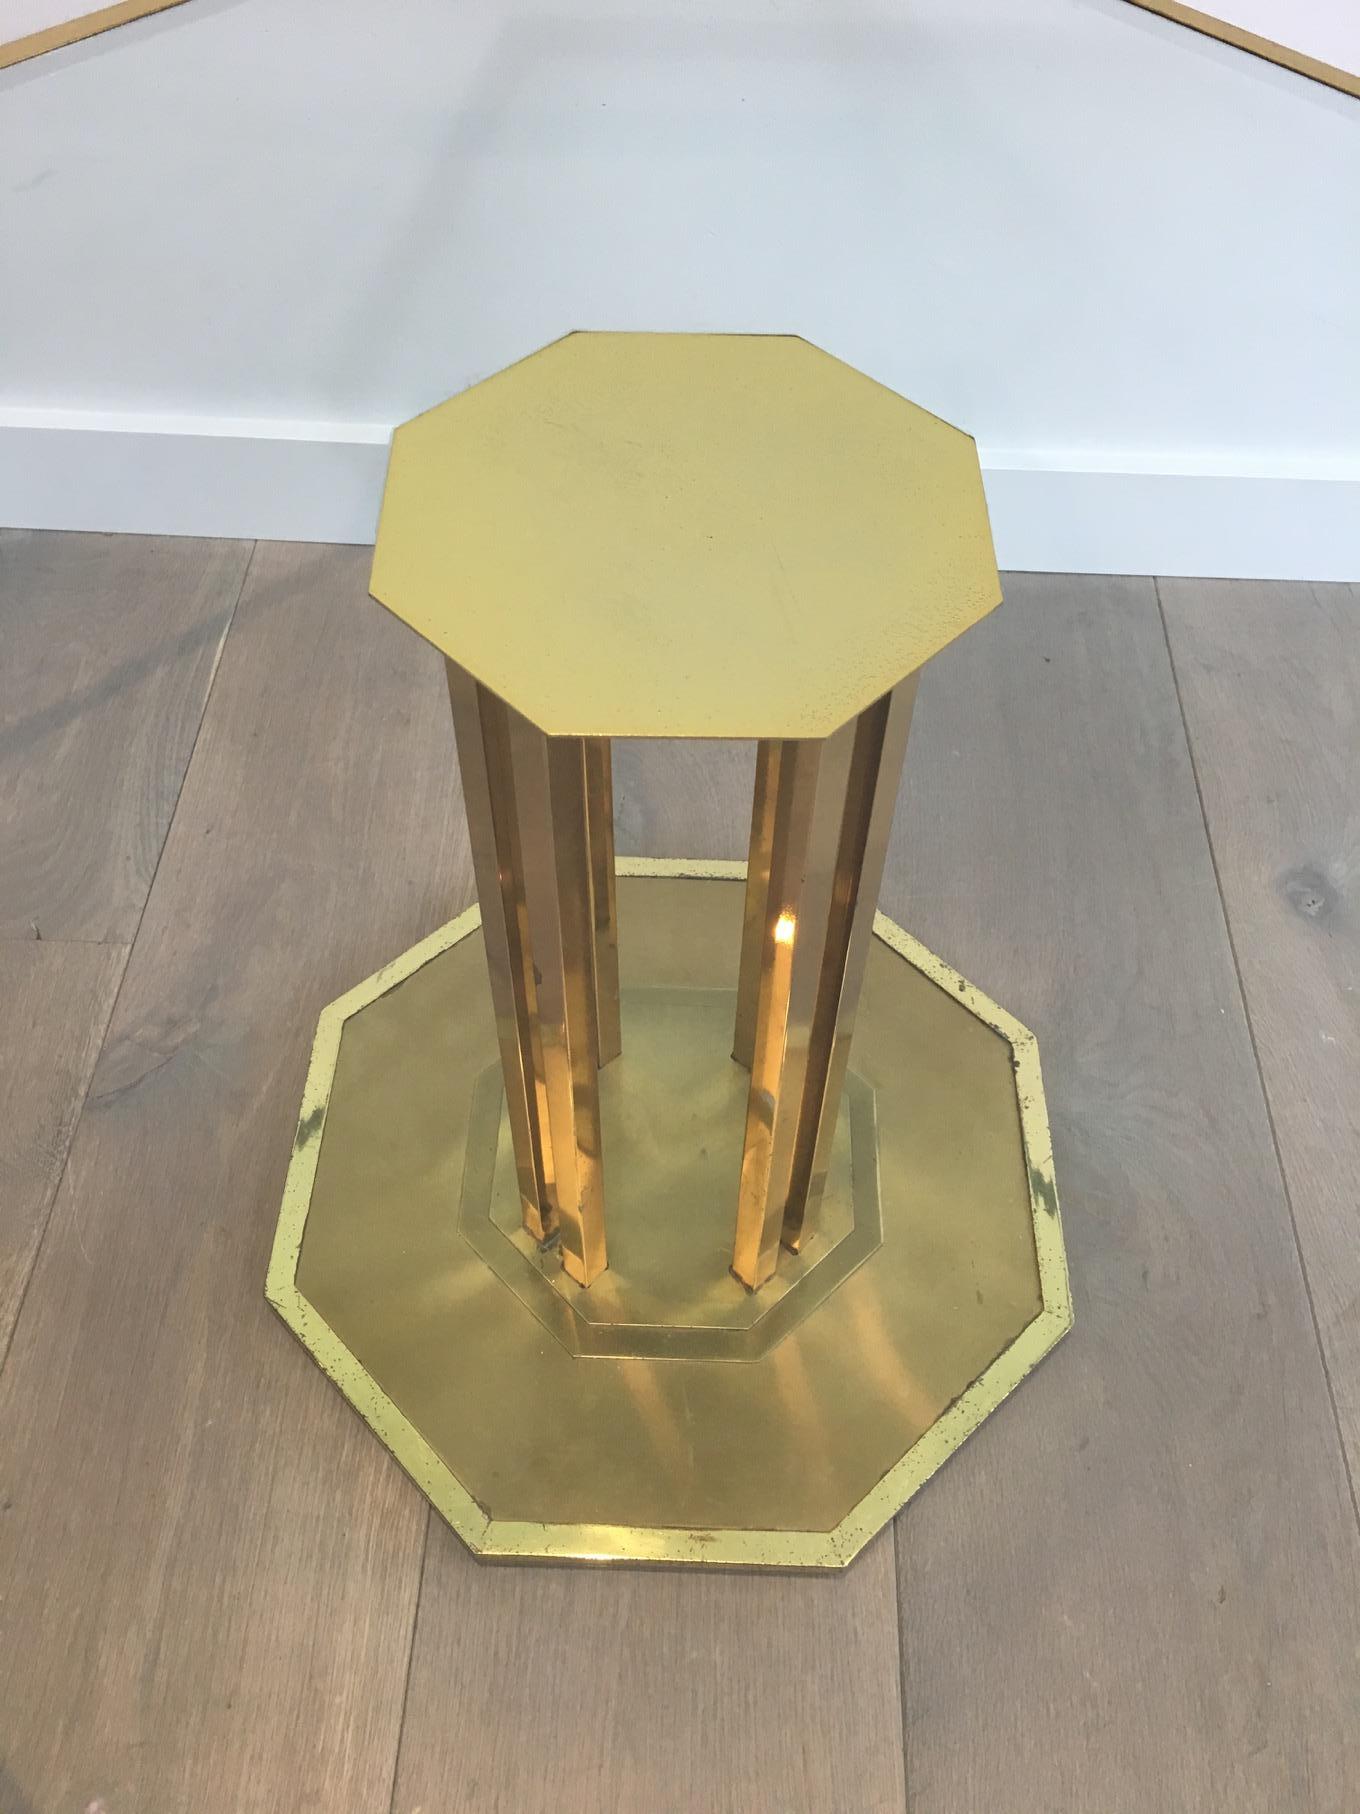 Rare Octagonal Brass and Glass Design Coffee Table, French, circa 1970 For Sale 1